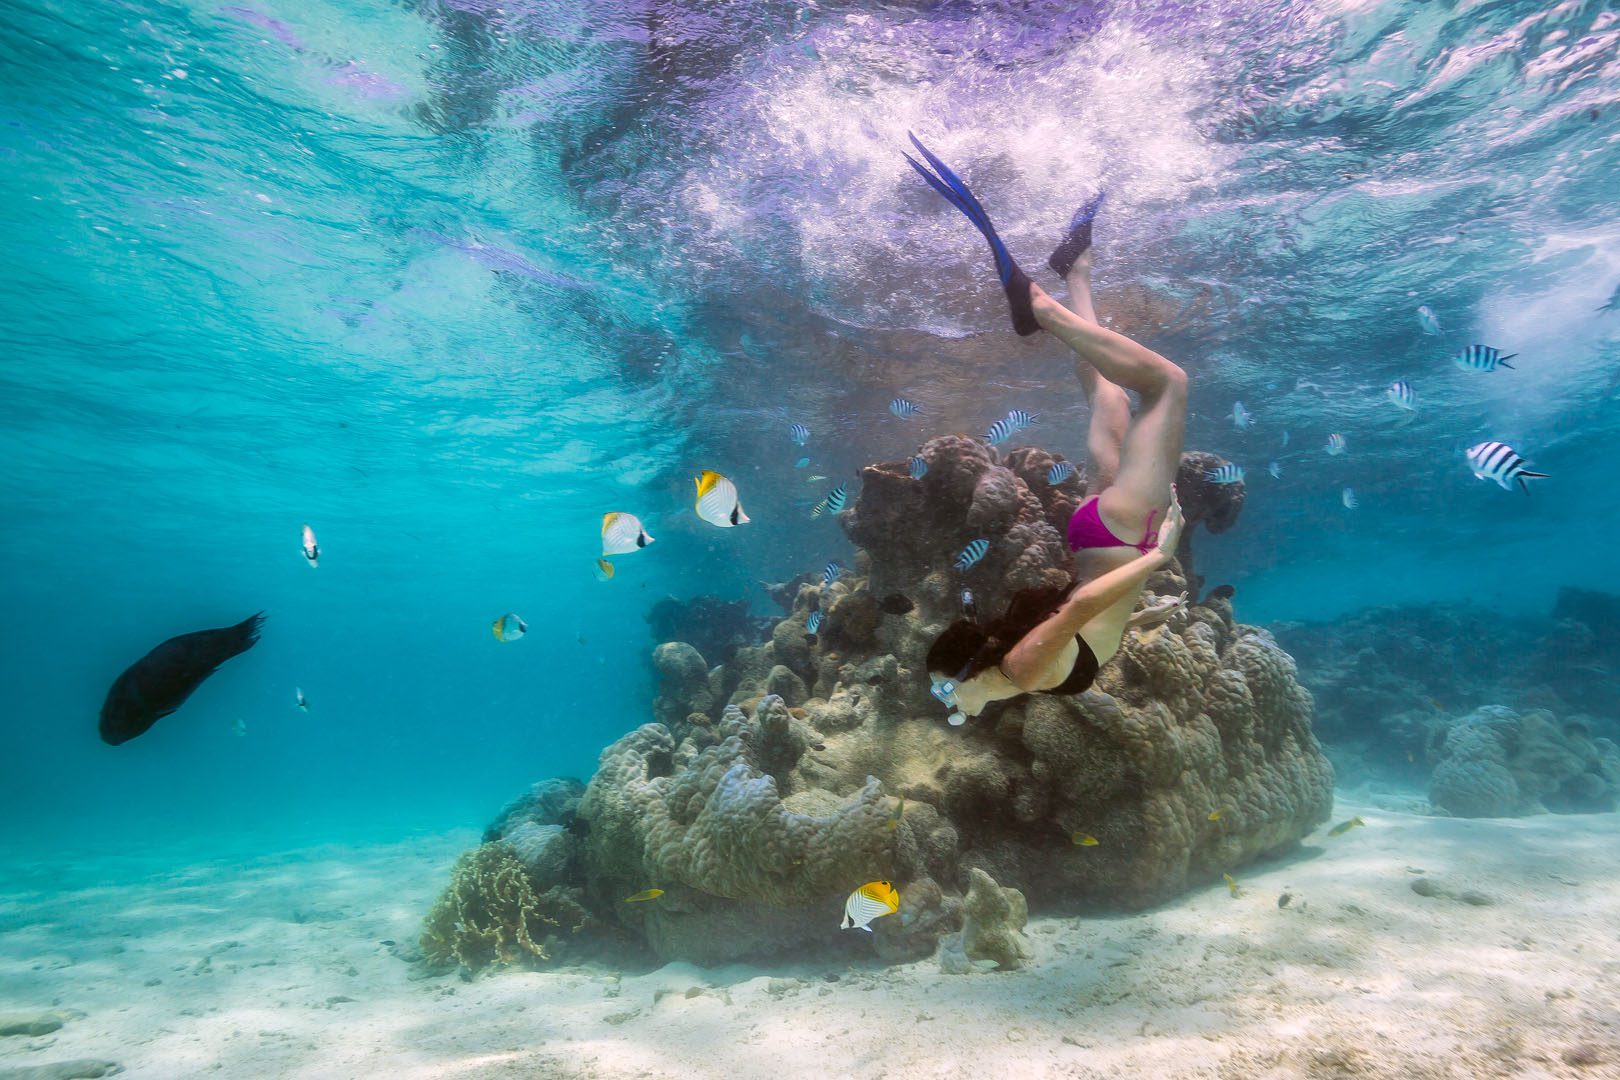 A beautiful image of the trove of treasures beneath the lagoon explored by a resort guest snorkeling along Muri waters